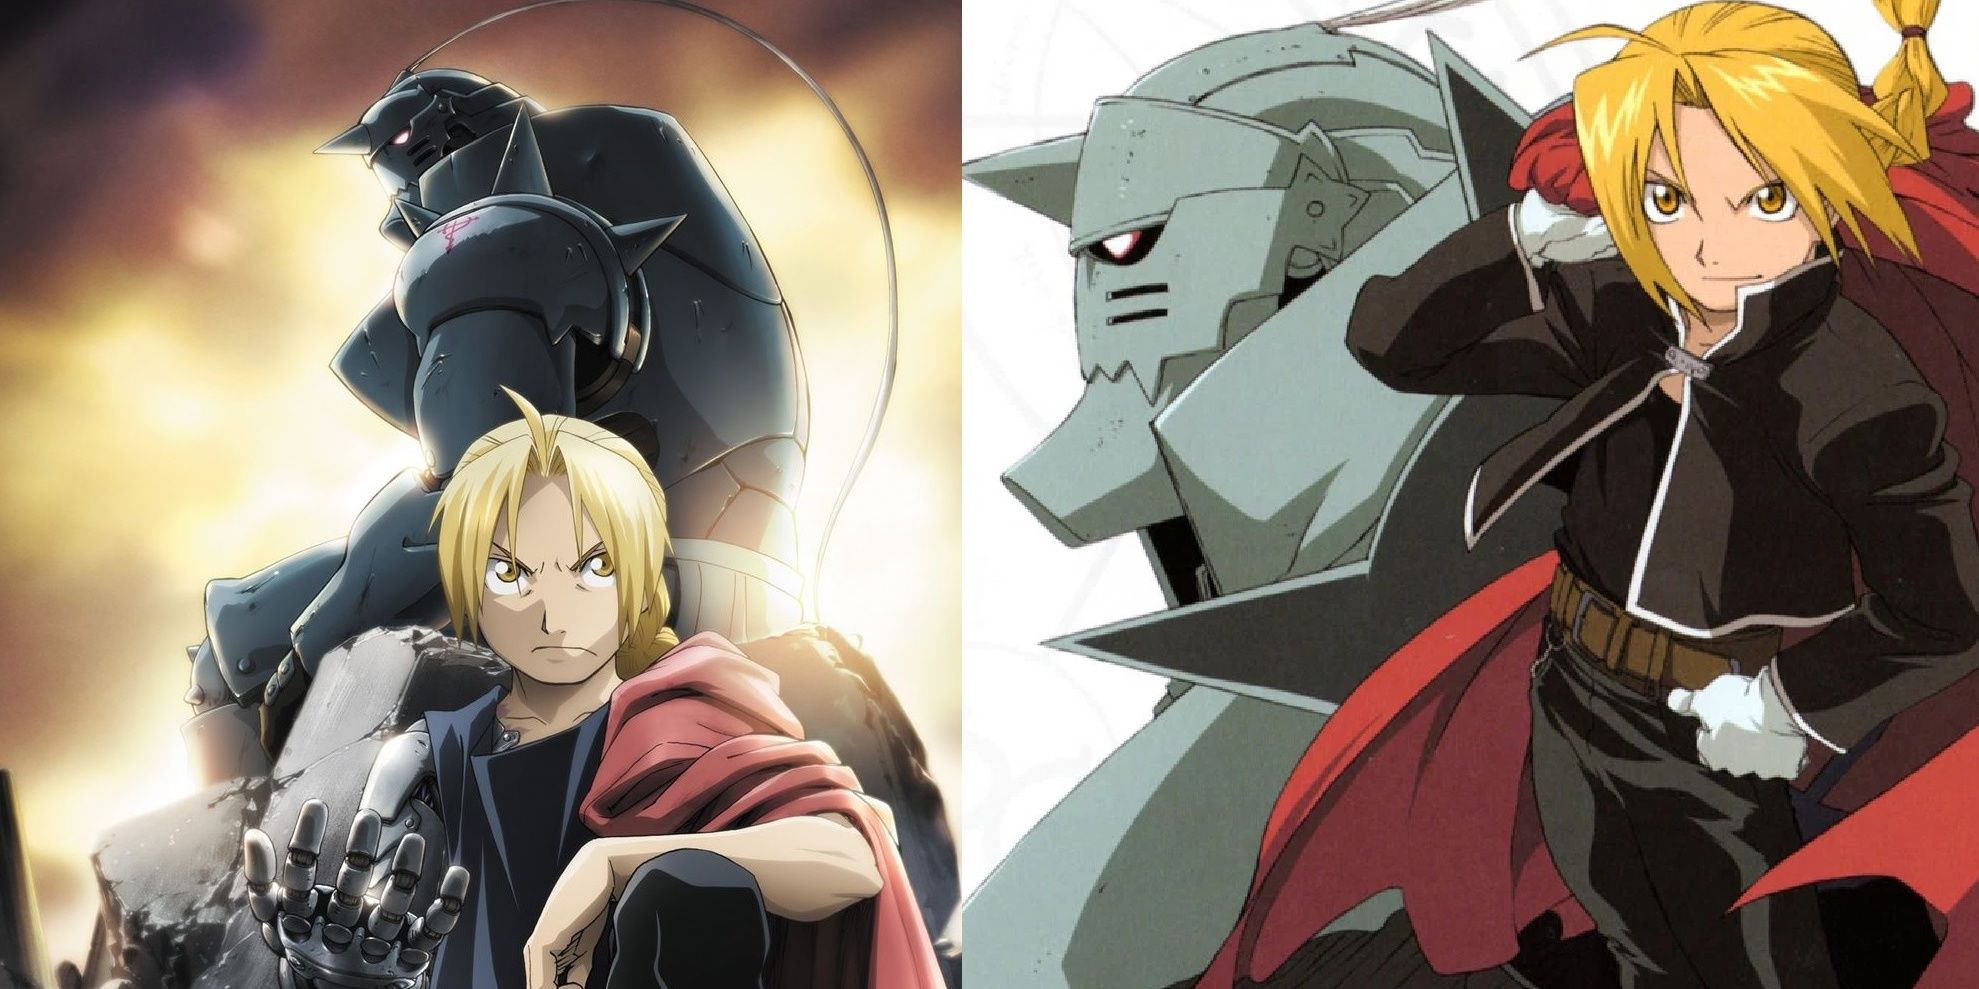 The Differences Between Fullmetal Alchemist and FMA: Brotherhood